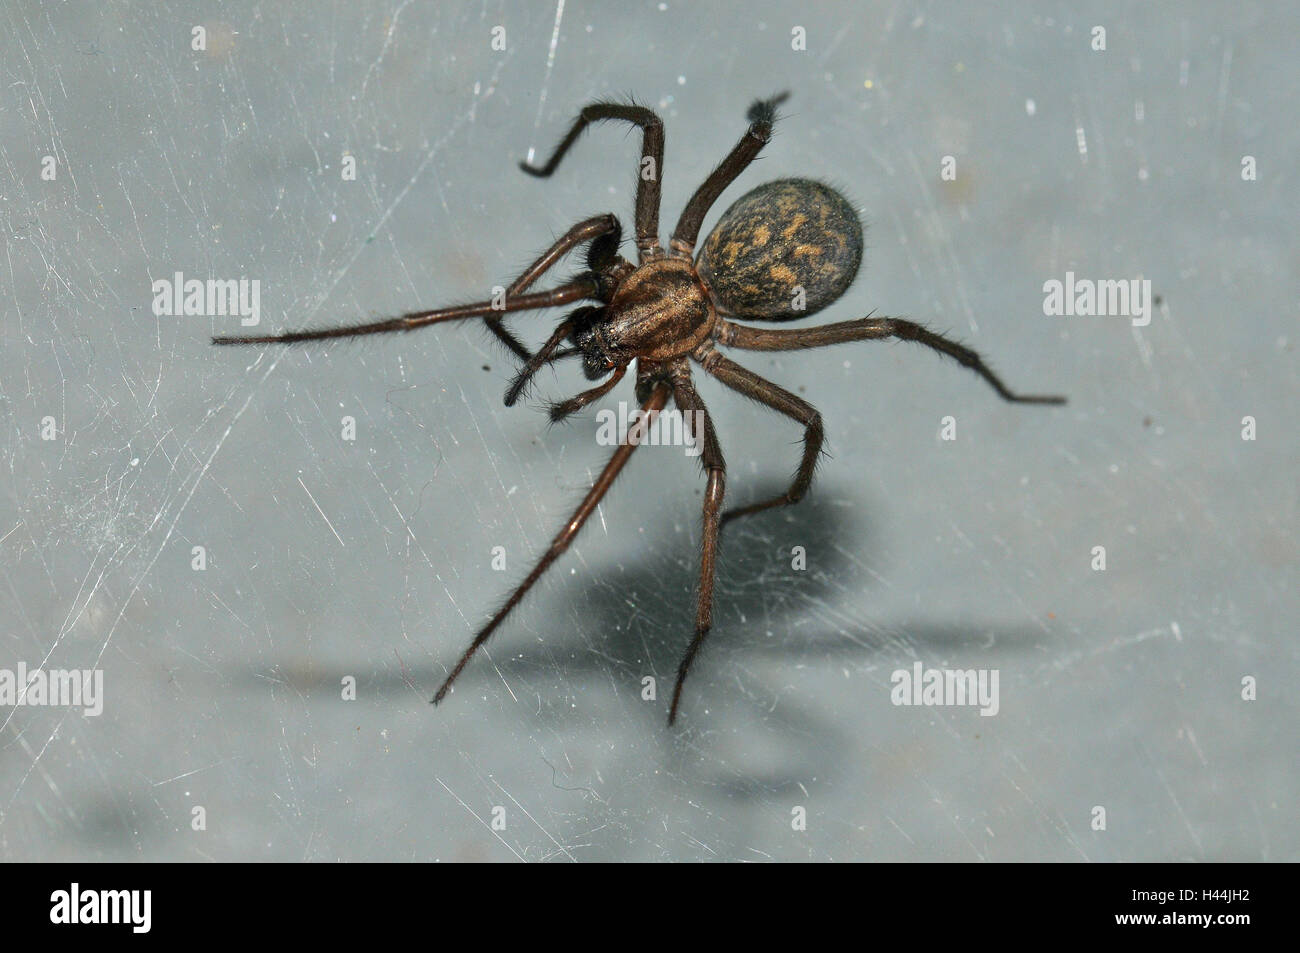 Big angle spider, house spider, spinning network, corner, Stock Photo